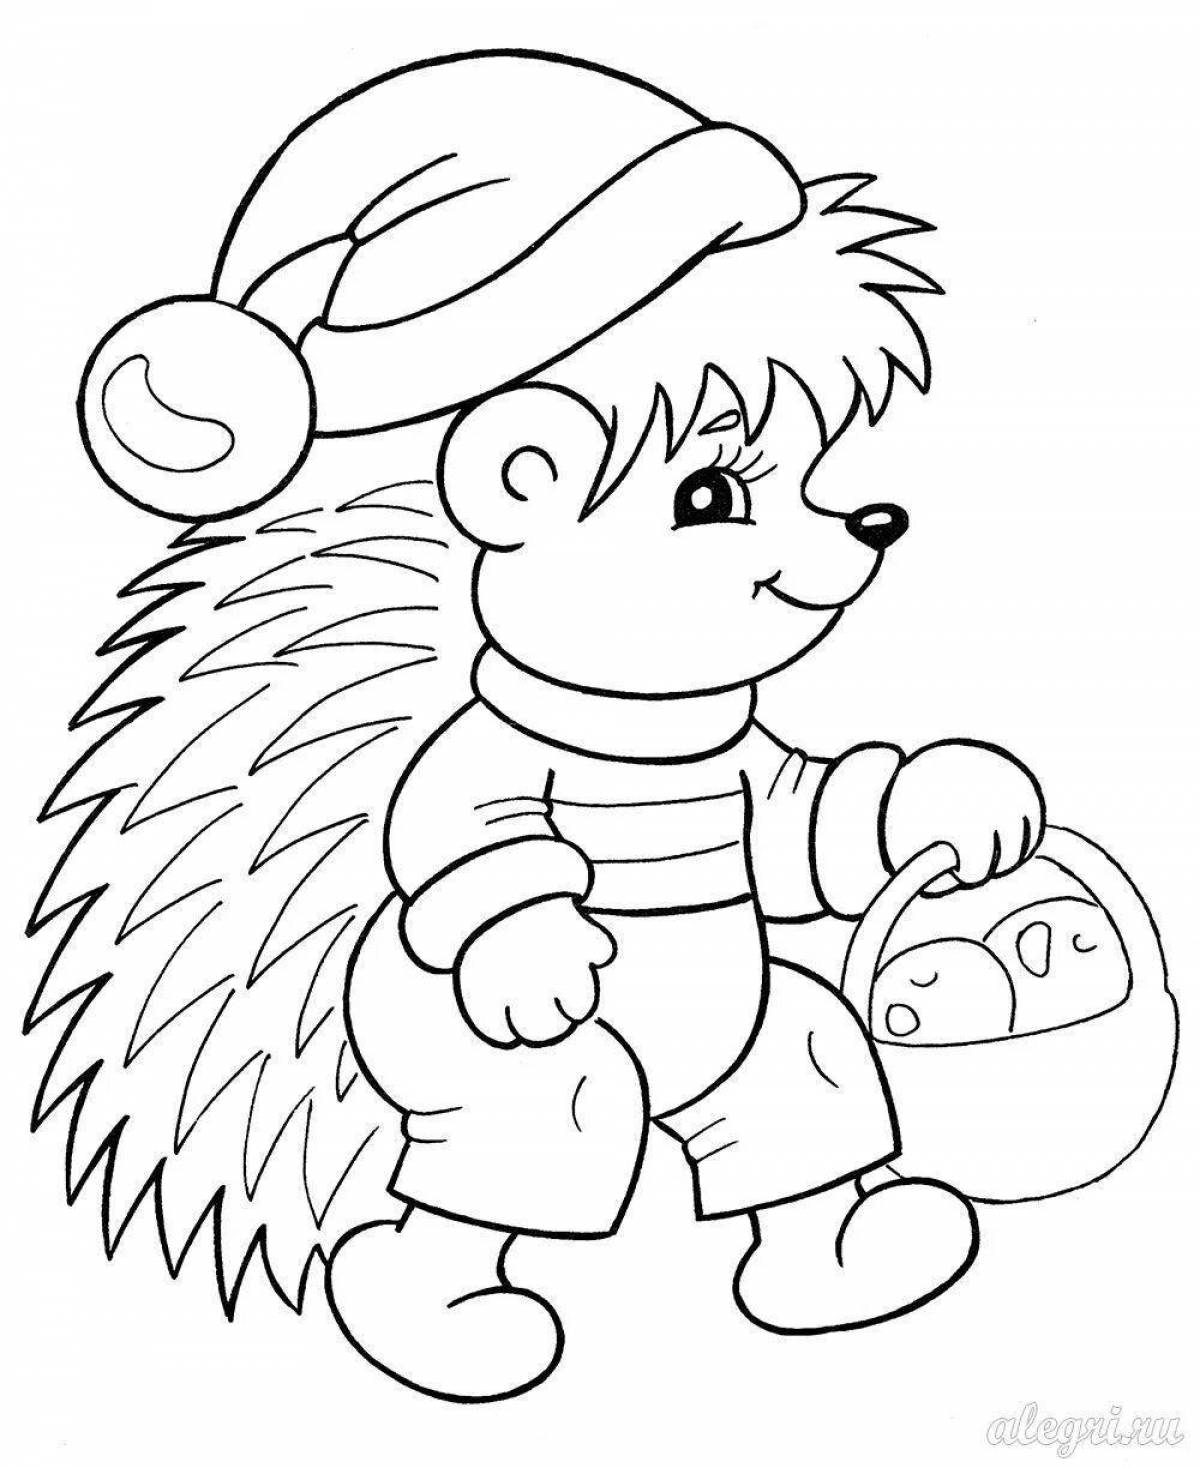 Nice hedgehog coloring pages for kids